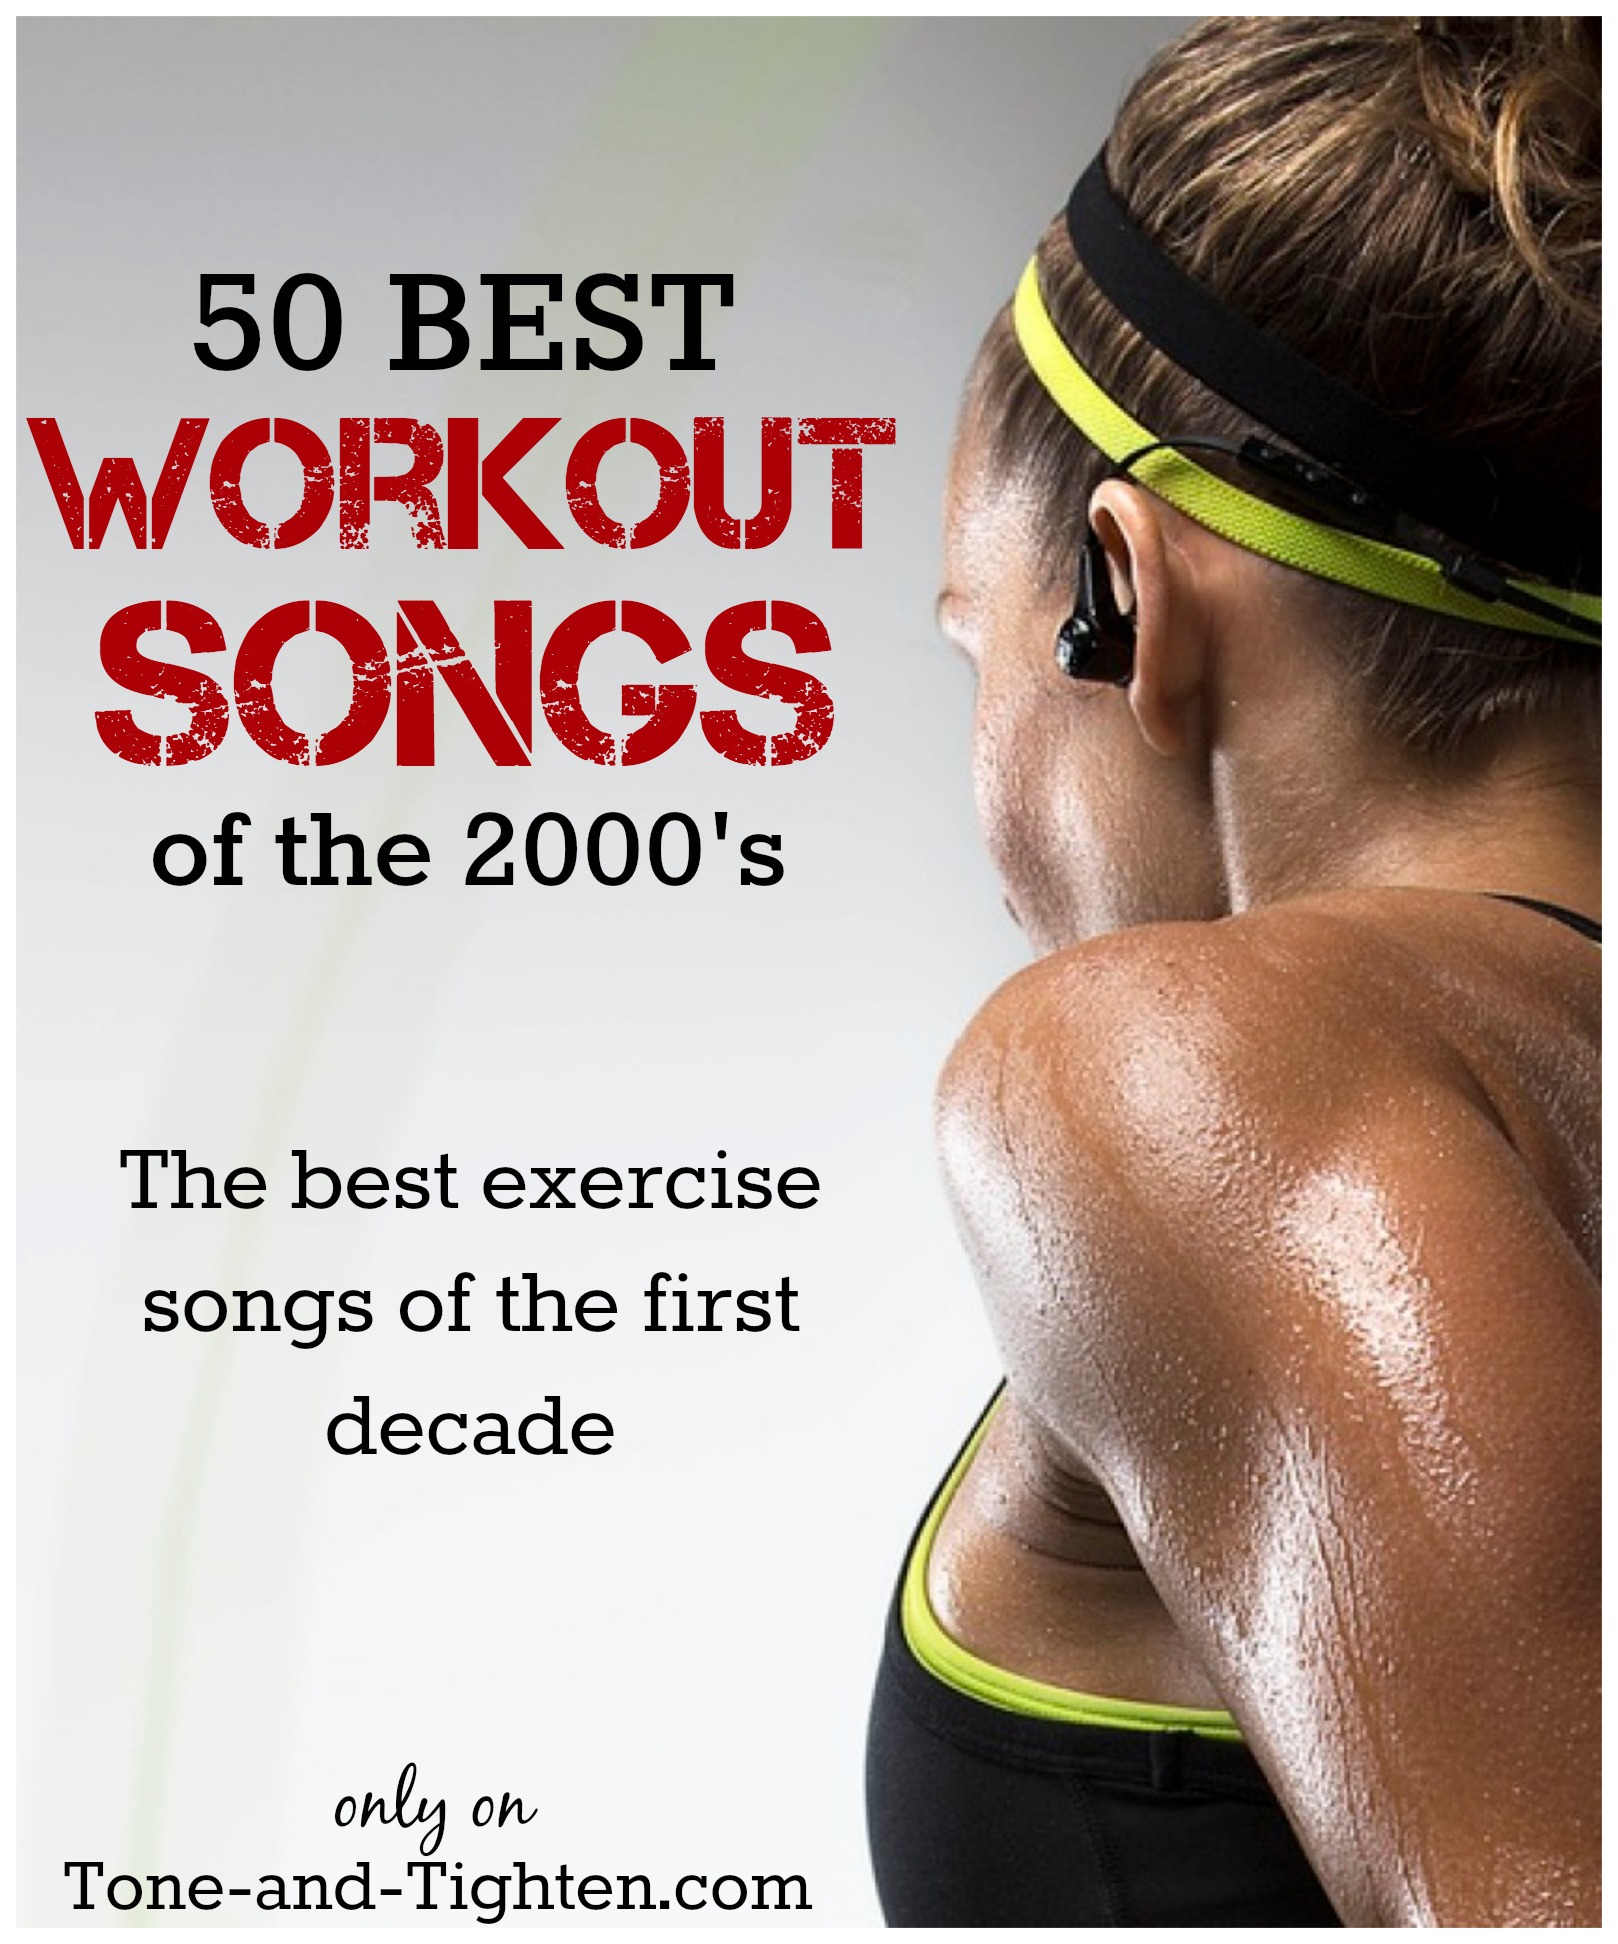 best-songs-2000-greatest-workout-exercise-2000's-music-tone-and-tighten